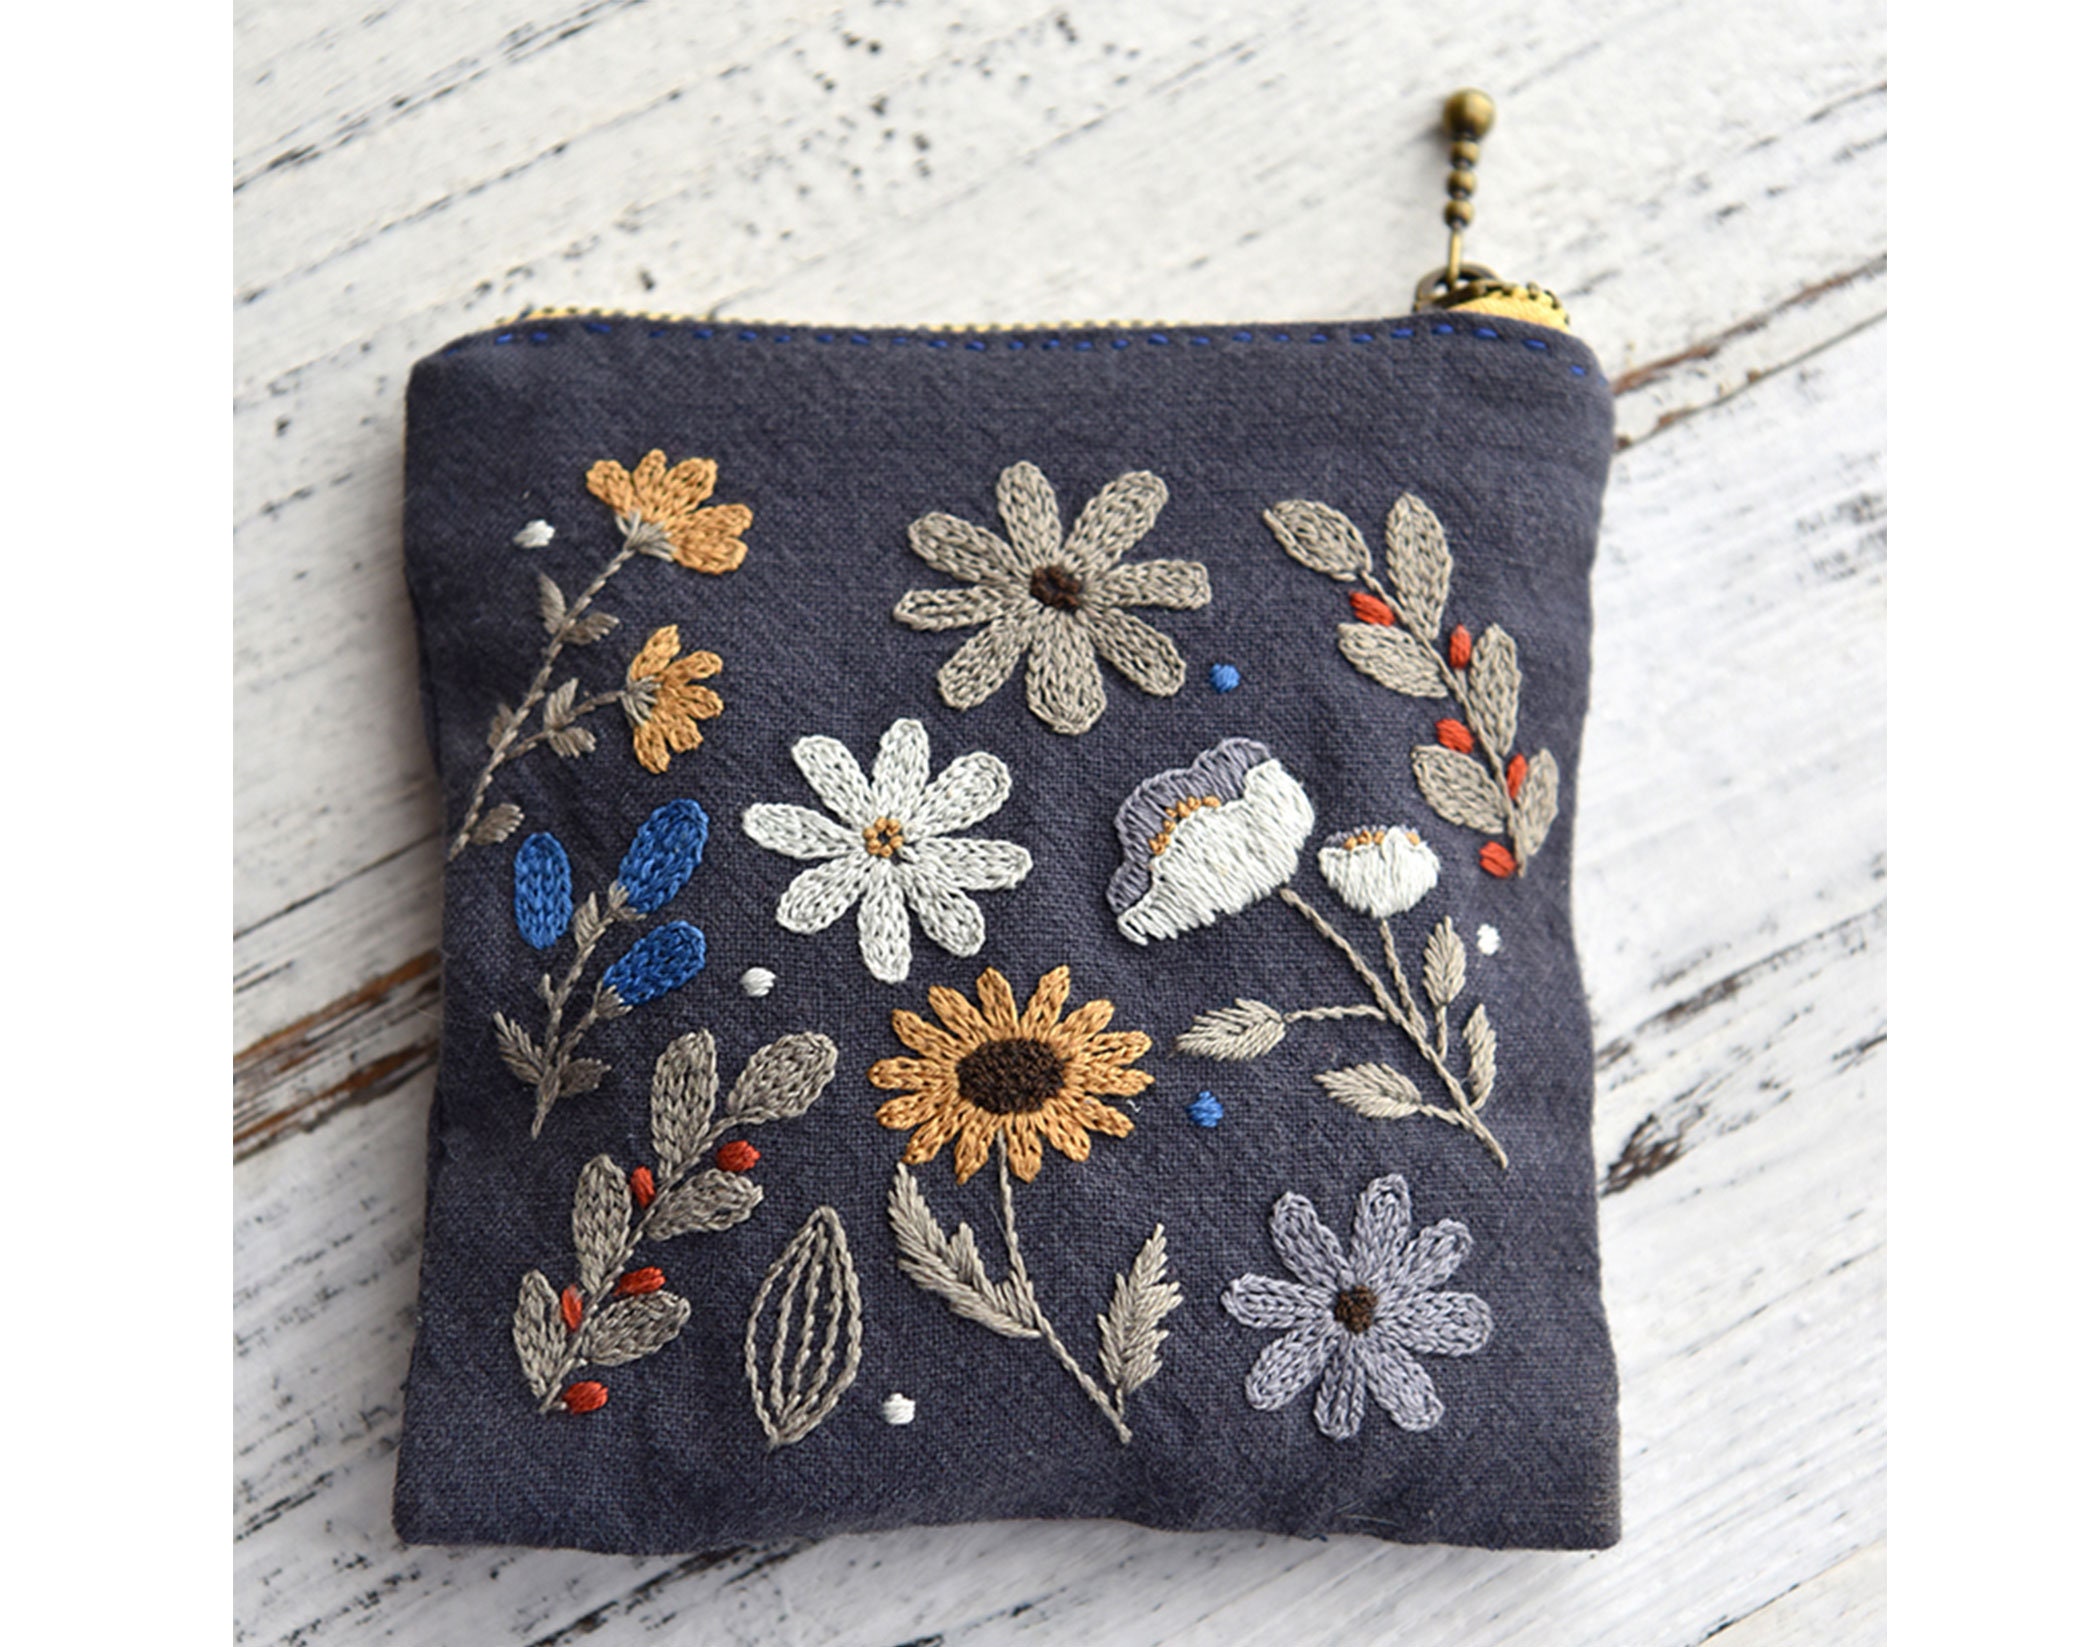 Fabric Coin Purse Embroidery Kit Small Bag Jewelry Bag 